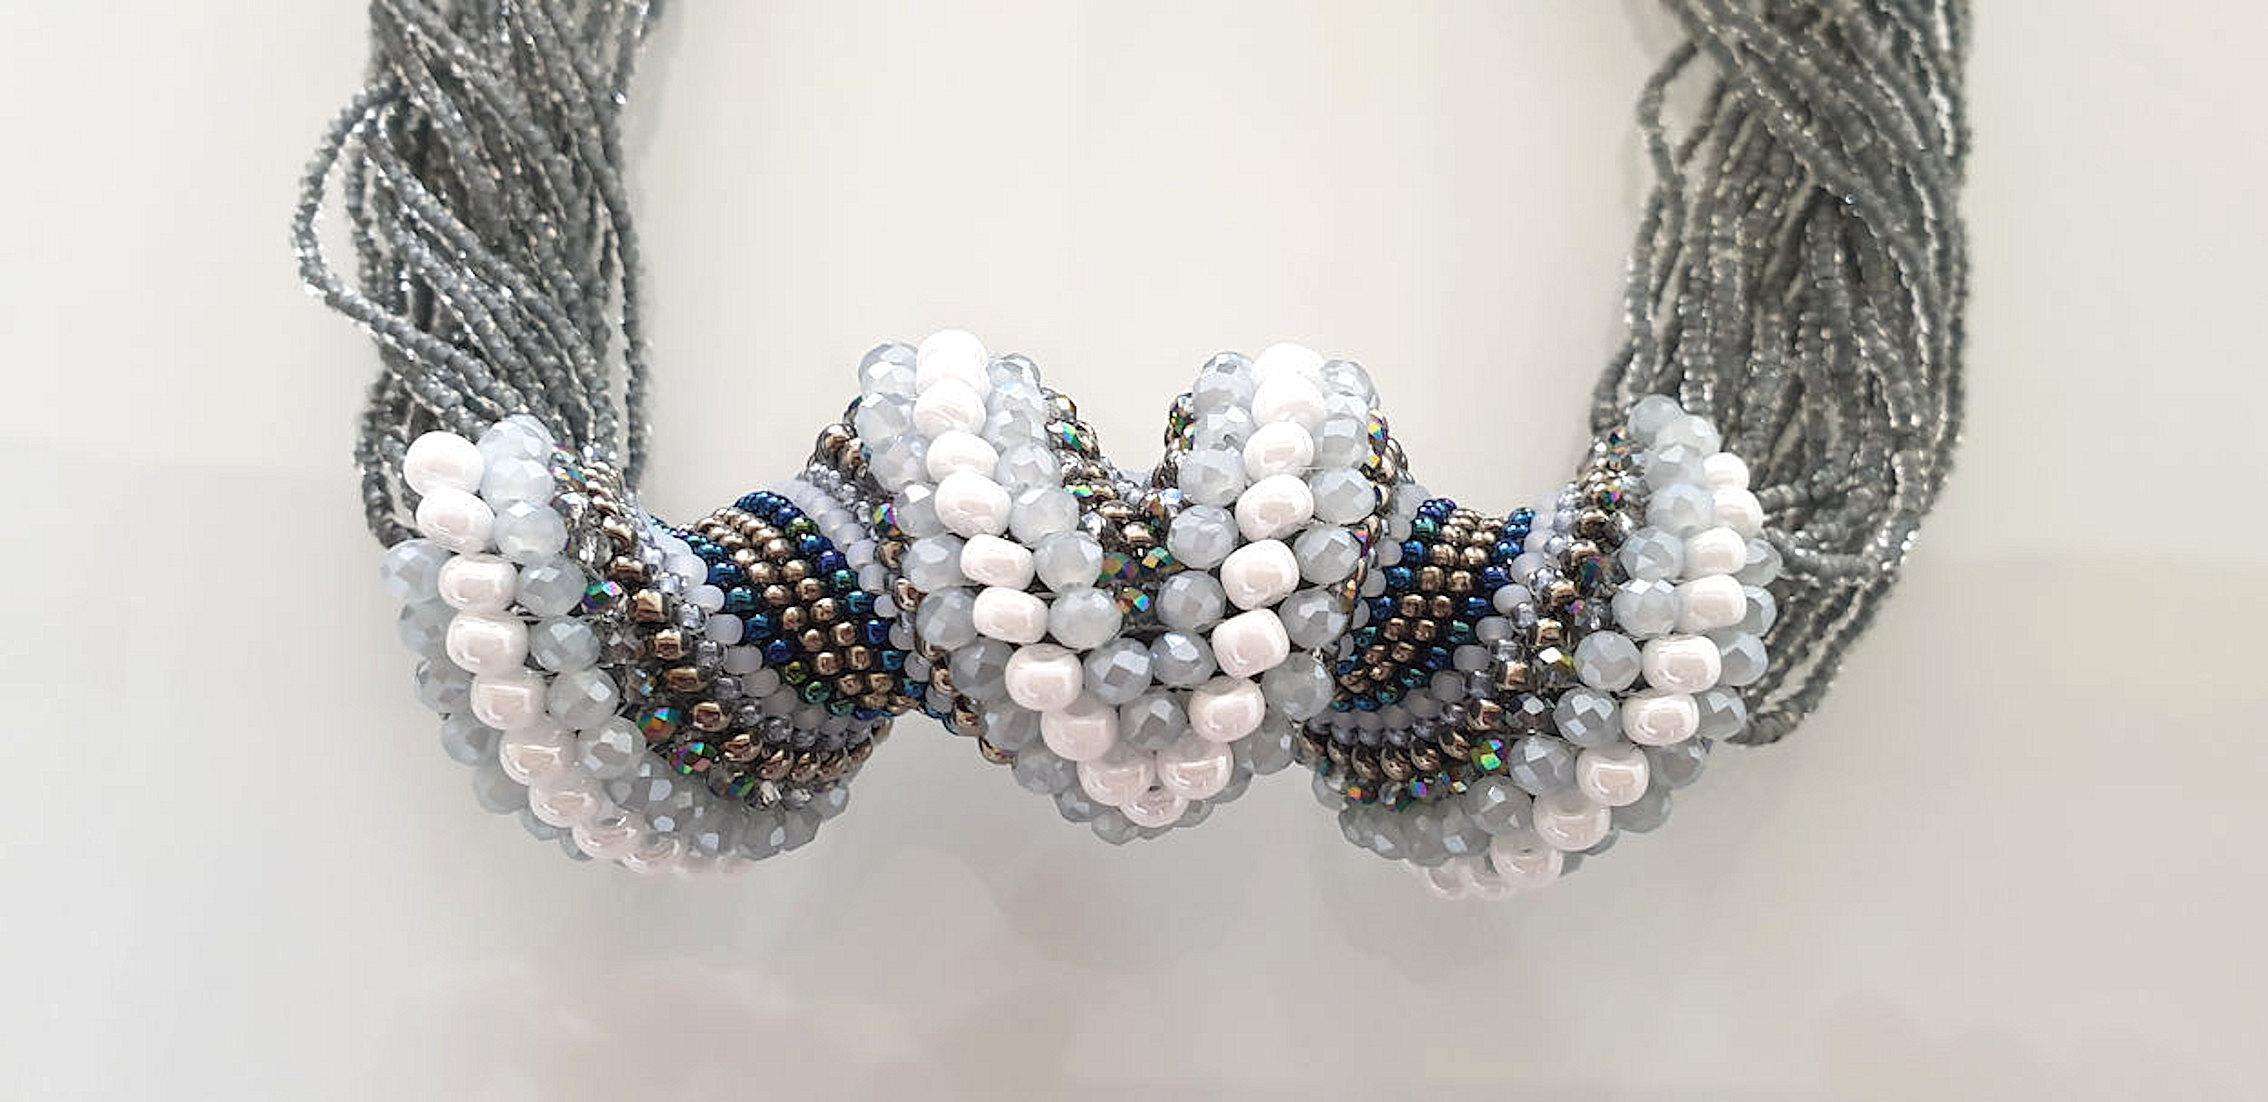 Women's Murano Glass Gray/ White Beads Hand Made Fashion Necklace by Artist Paola B.